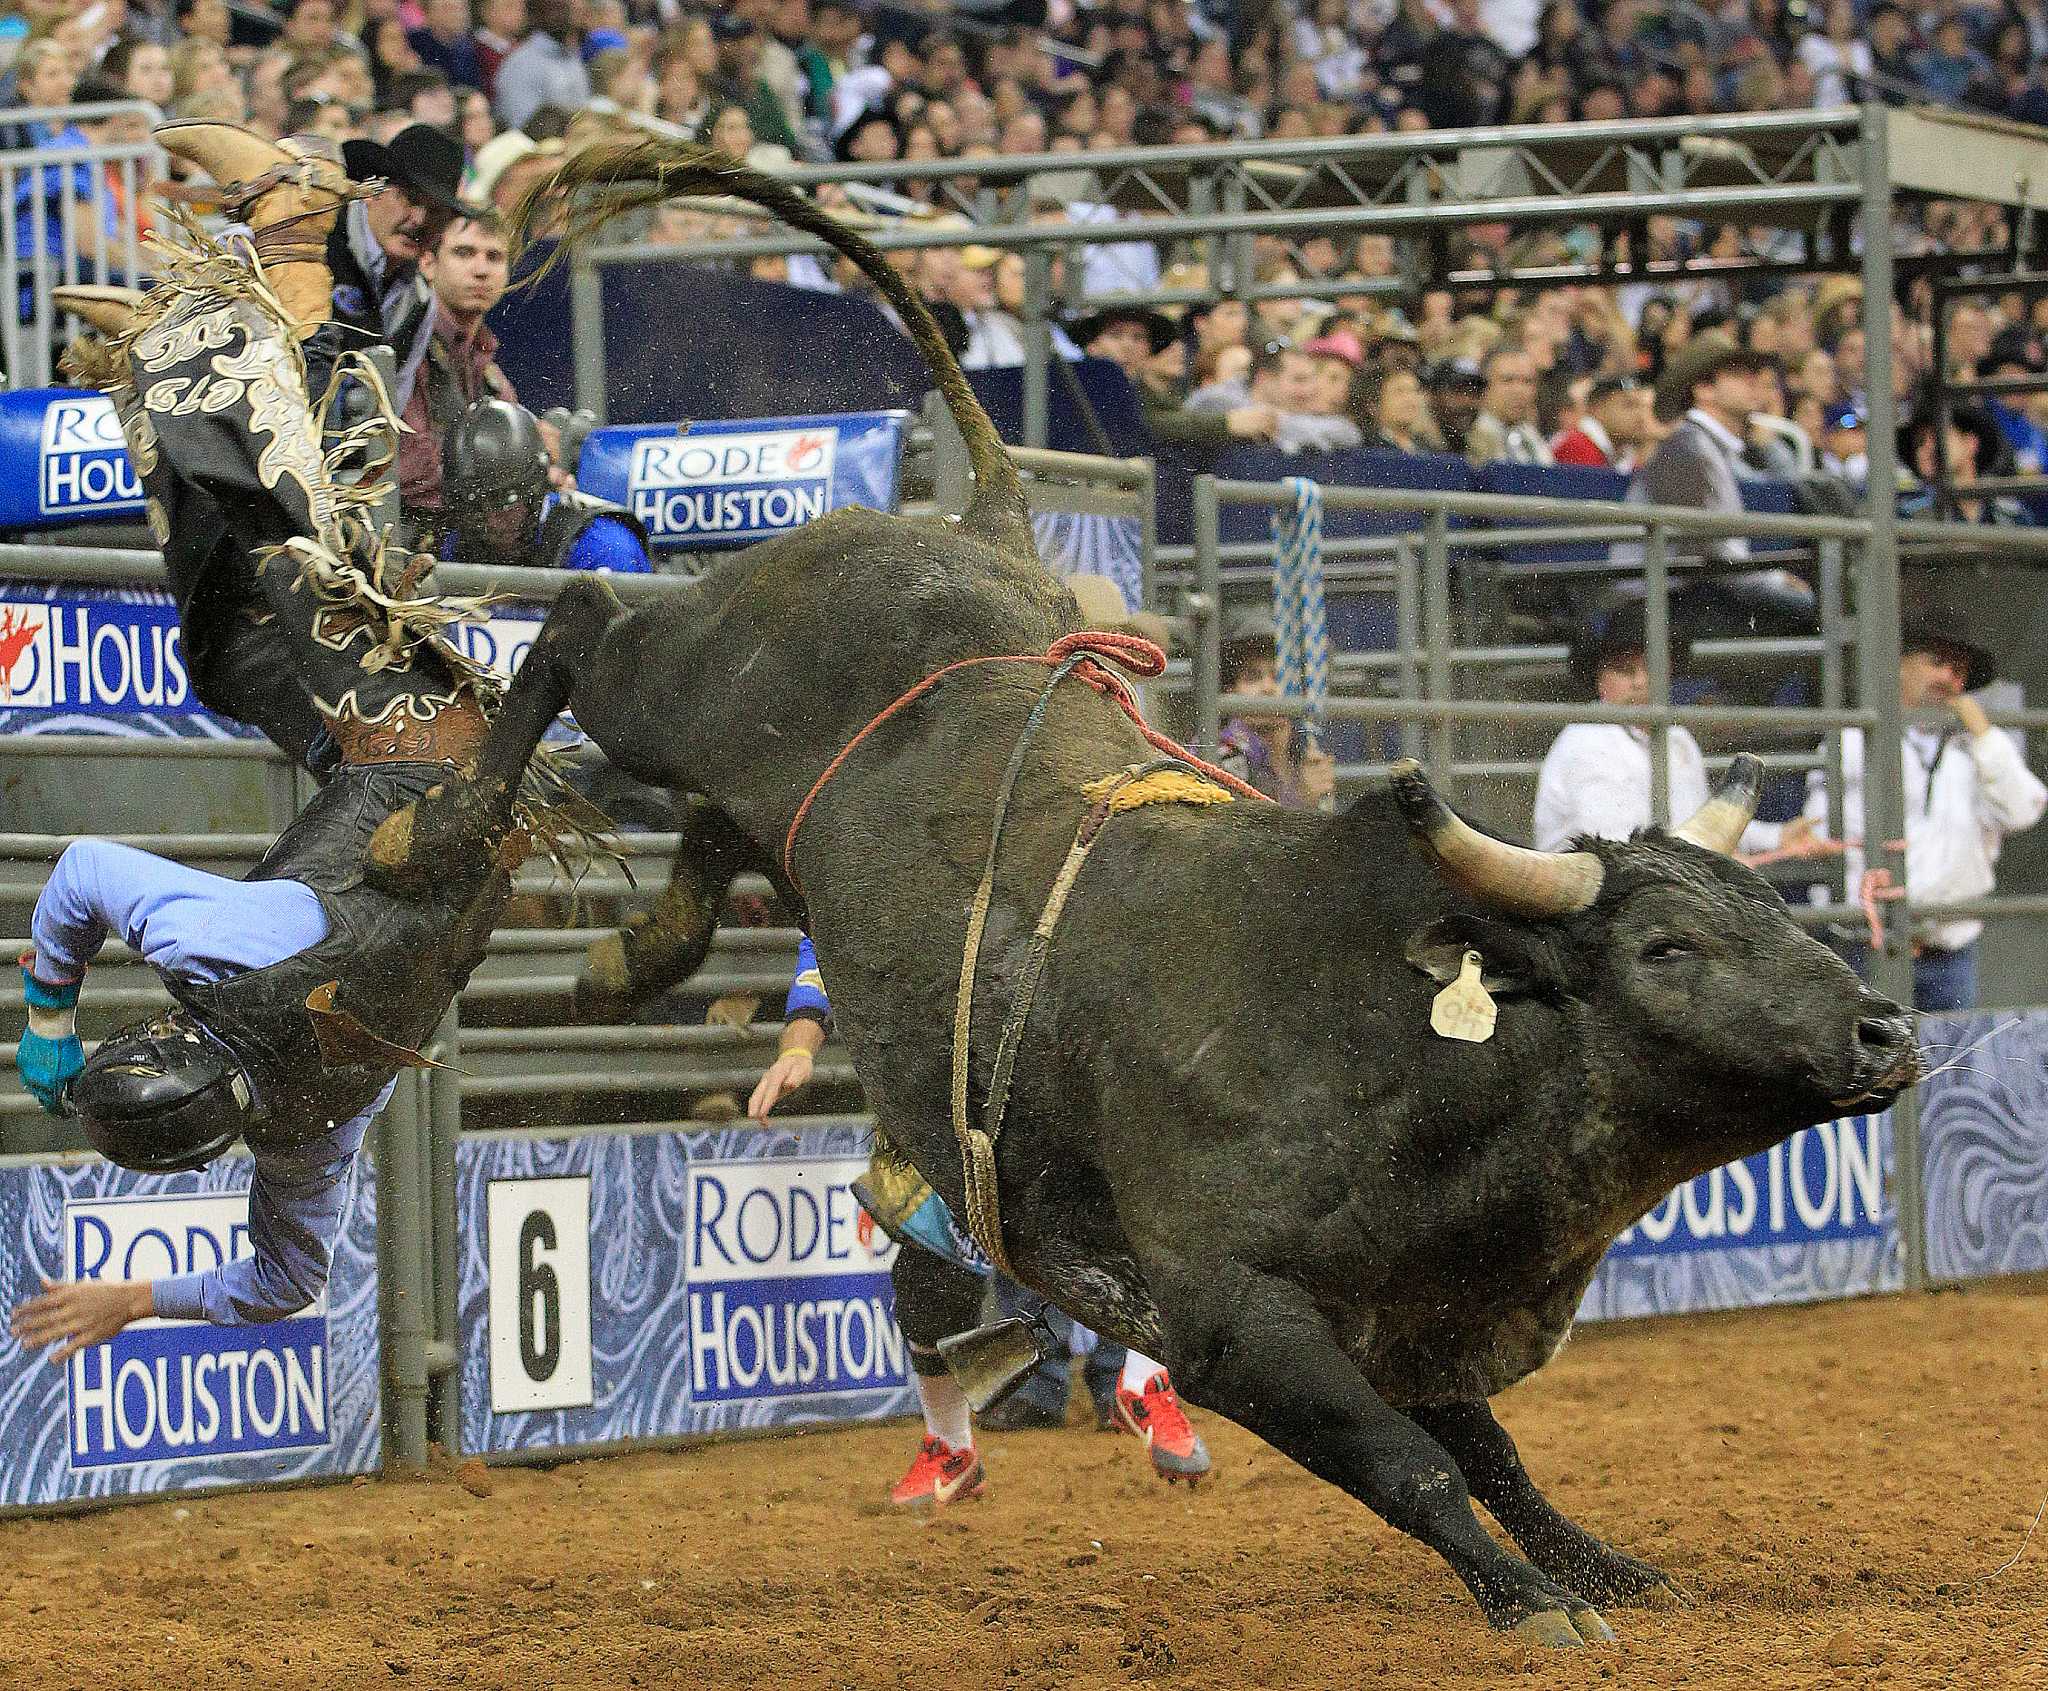 Concussions don't deter most bull riders.